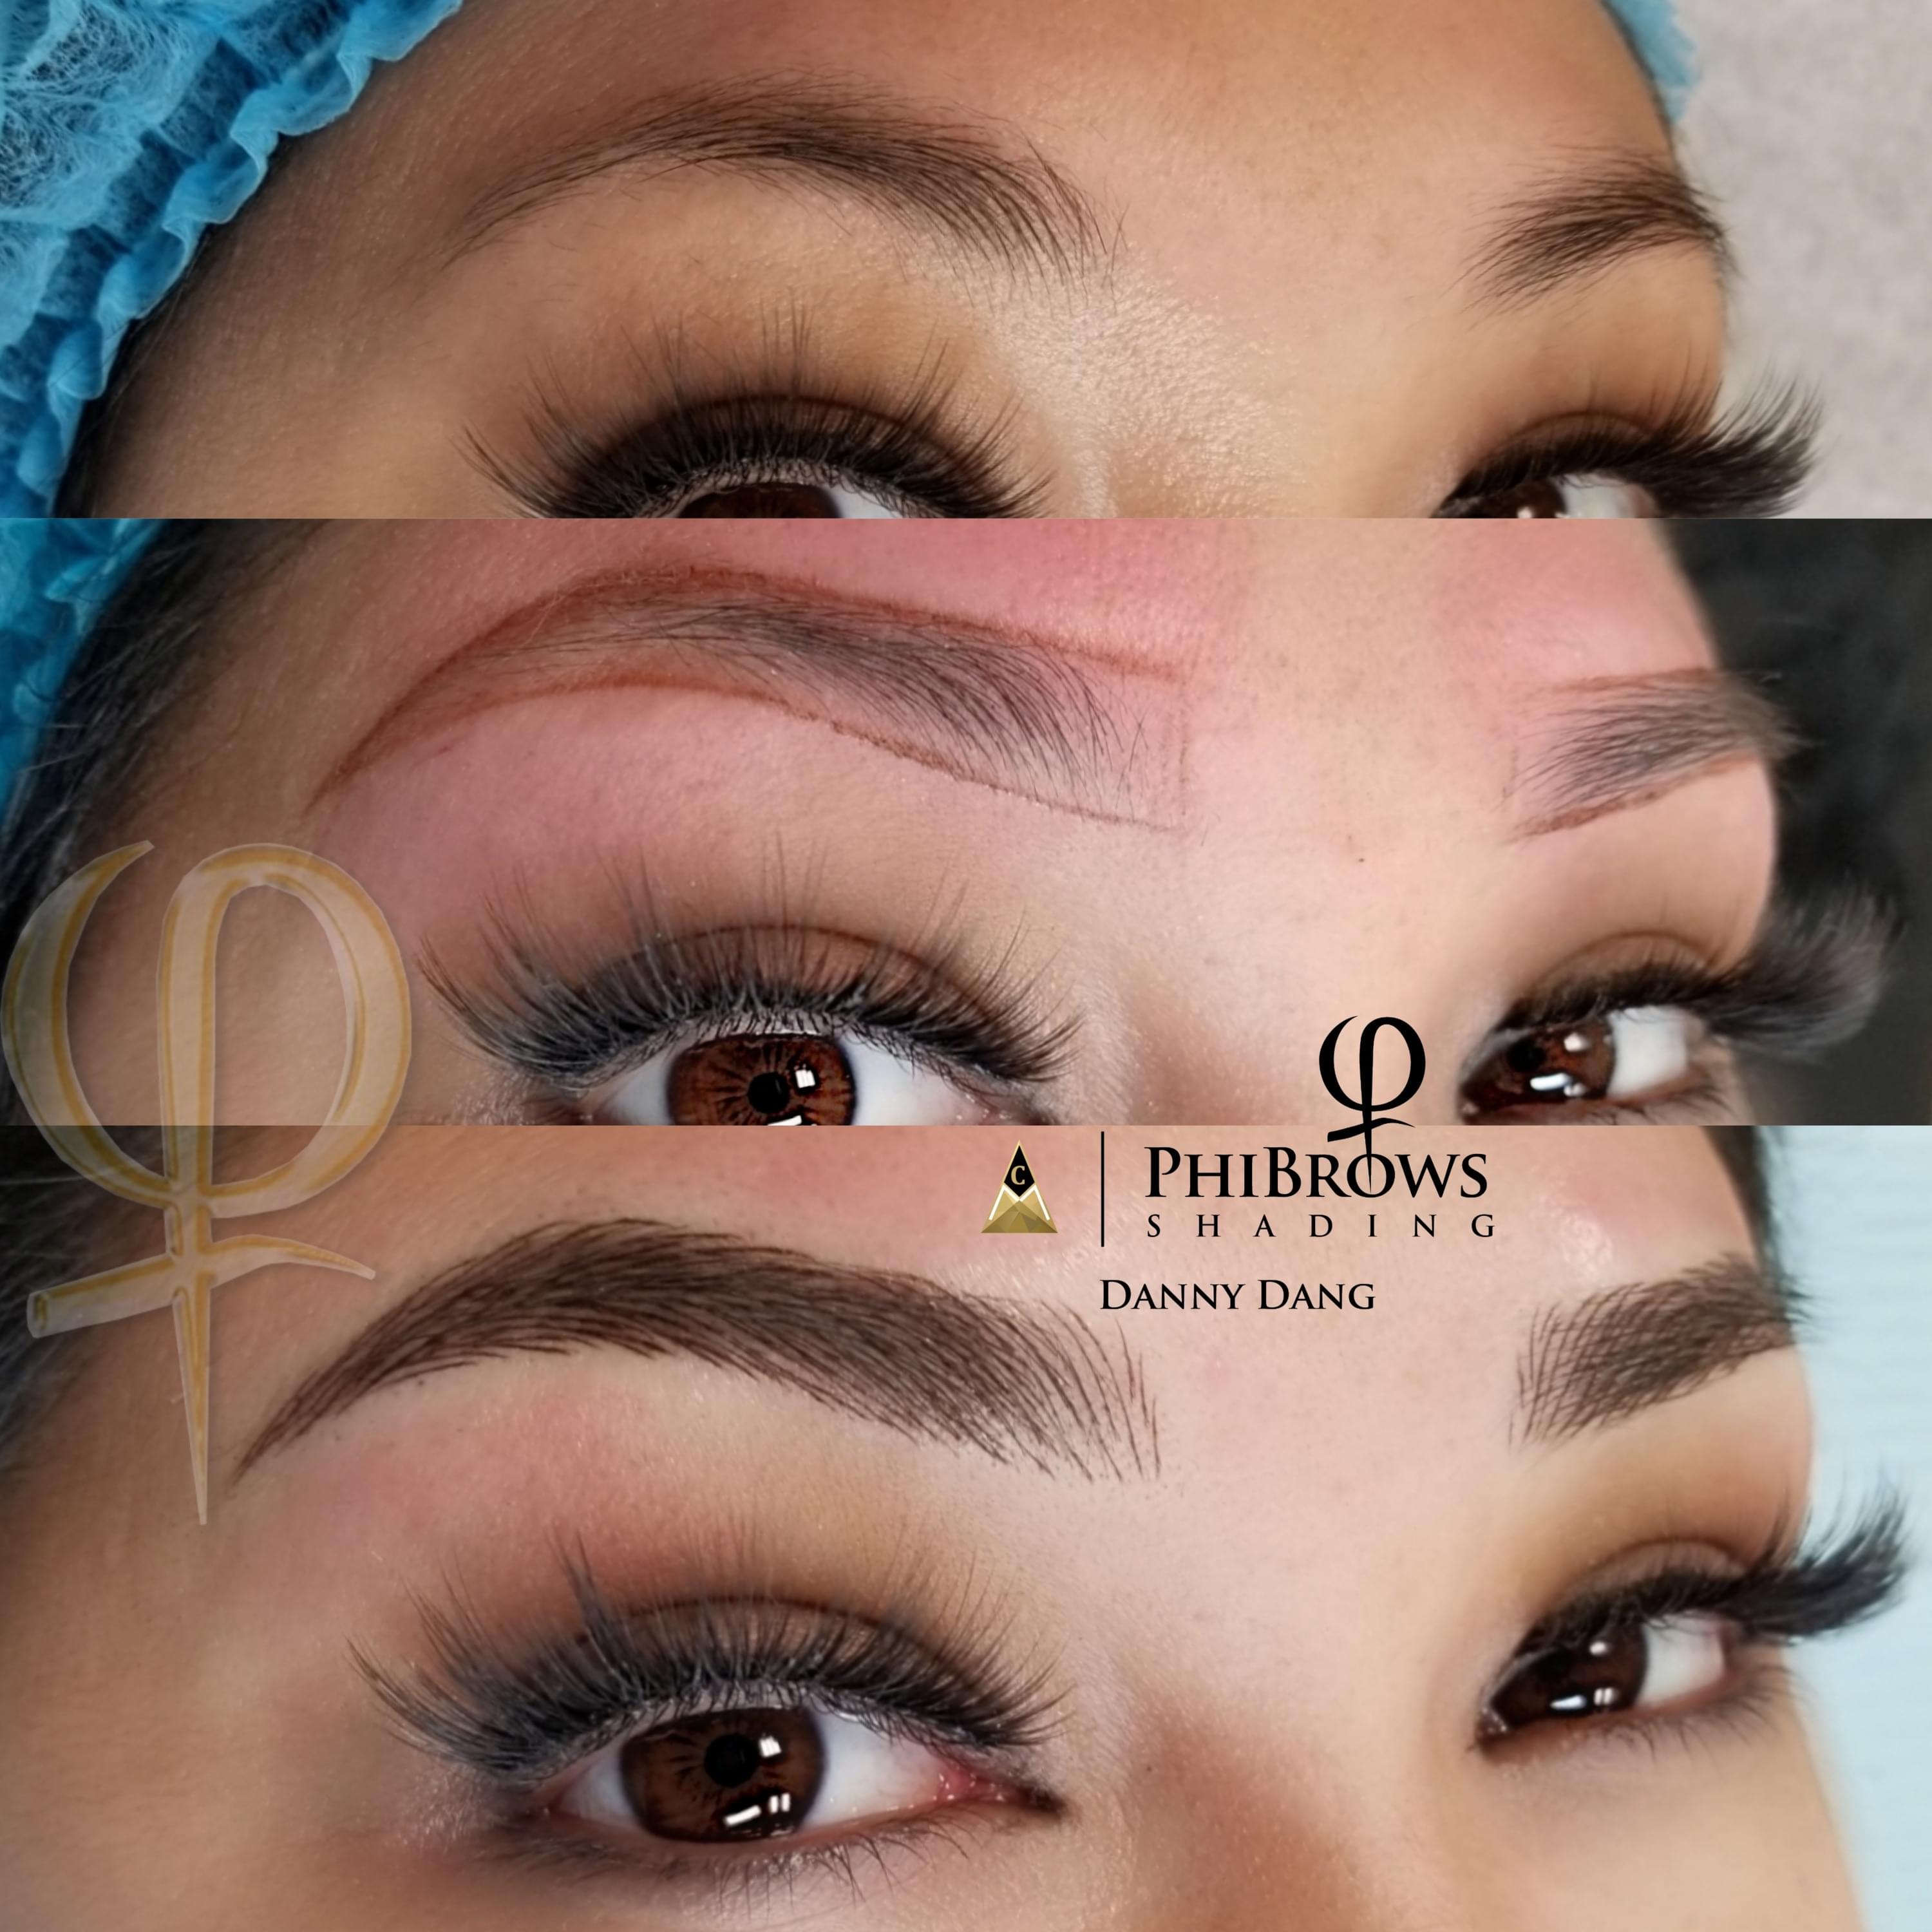 phibrows, phiacademy, microblading, microblading eyebrows, microblading eyebrows before and after, microblading before and after, phibrows before and after, best microblading course